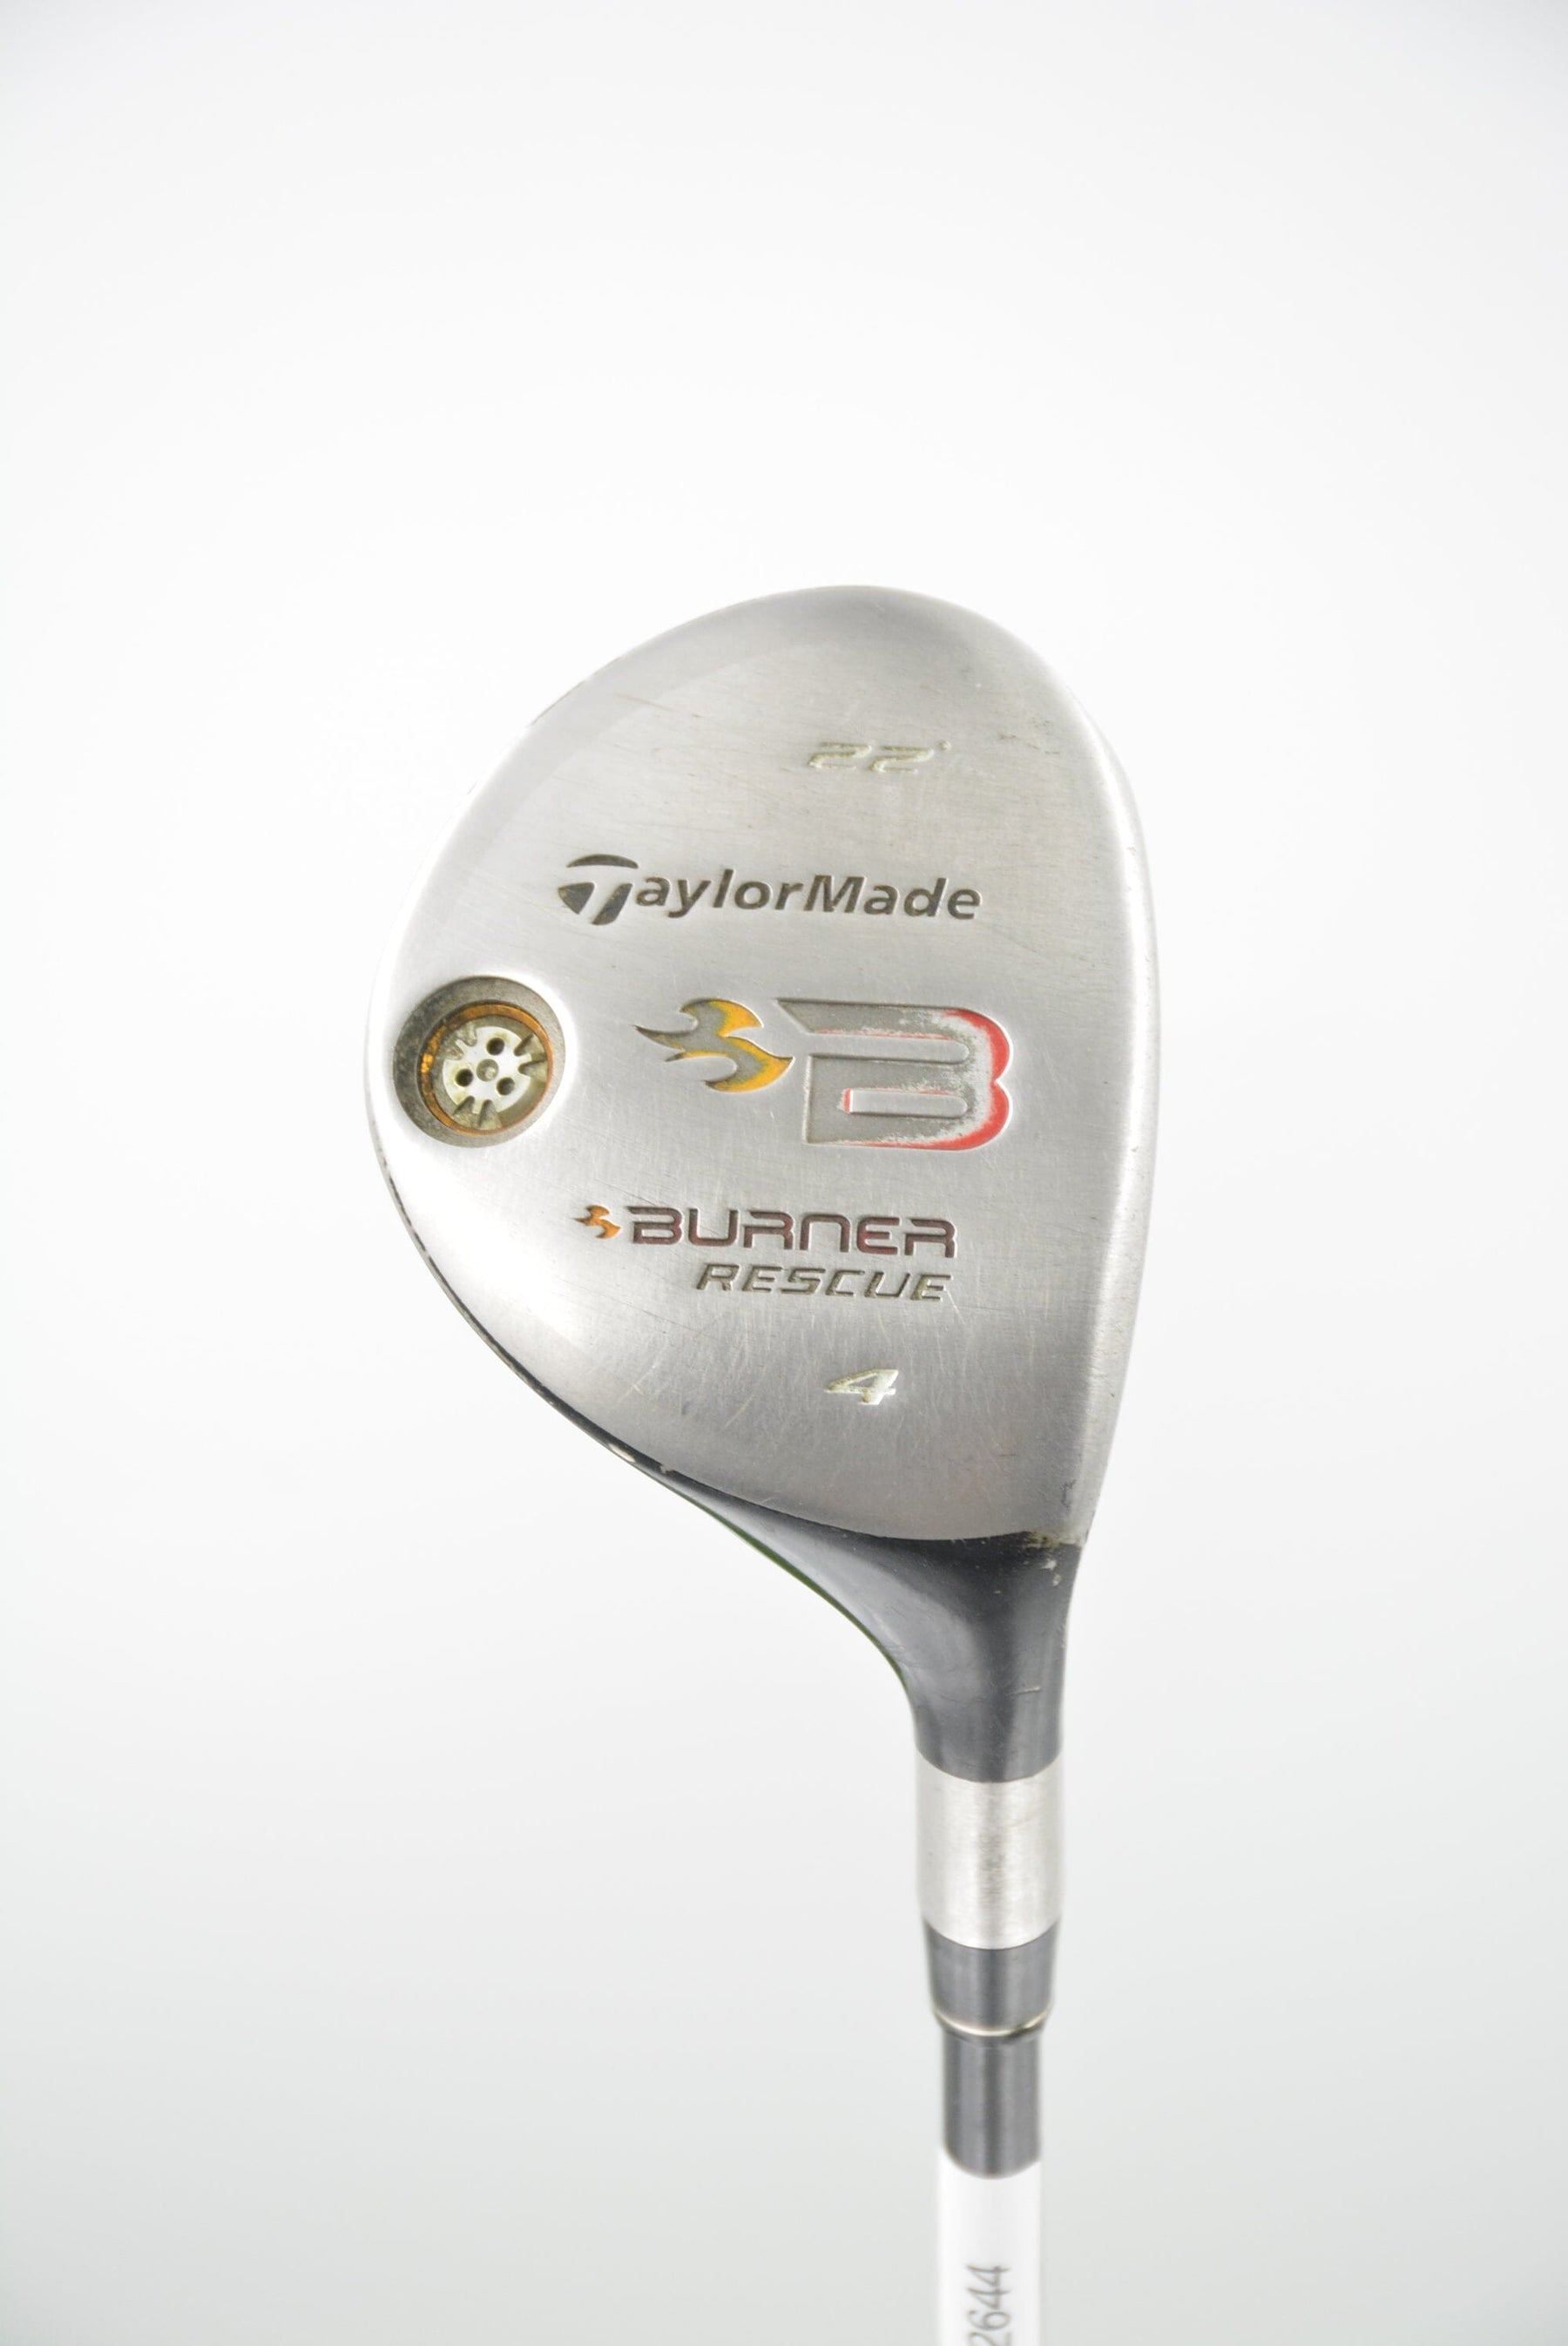 TaylorMade Burner Rescue 4 Hybrid S Flex Golf Clubs GolfRoots 